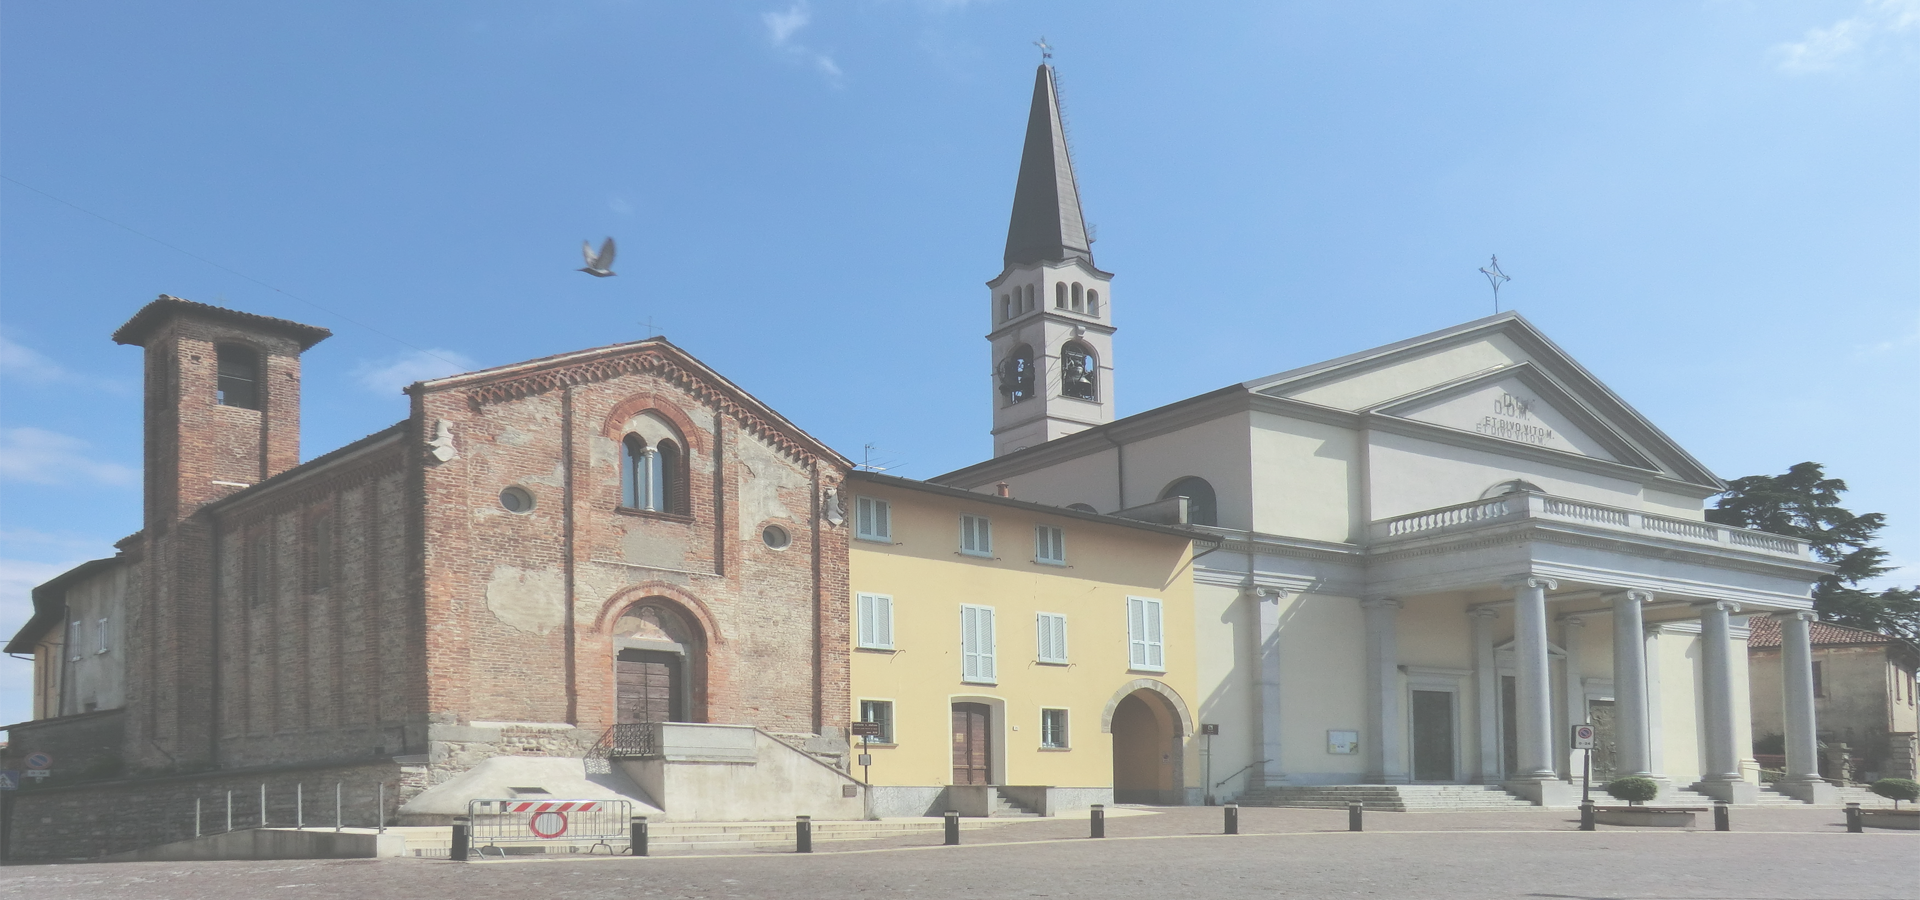 <b>Seveso, The Province of Monza and Brianza, Lombardy, Italy</b>